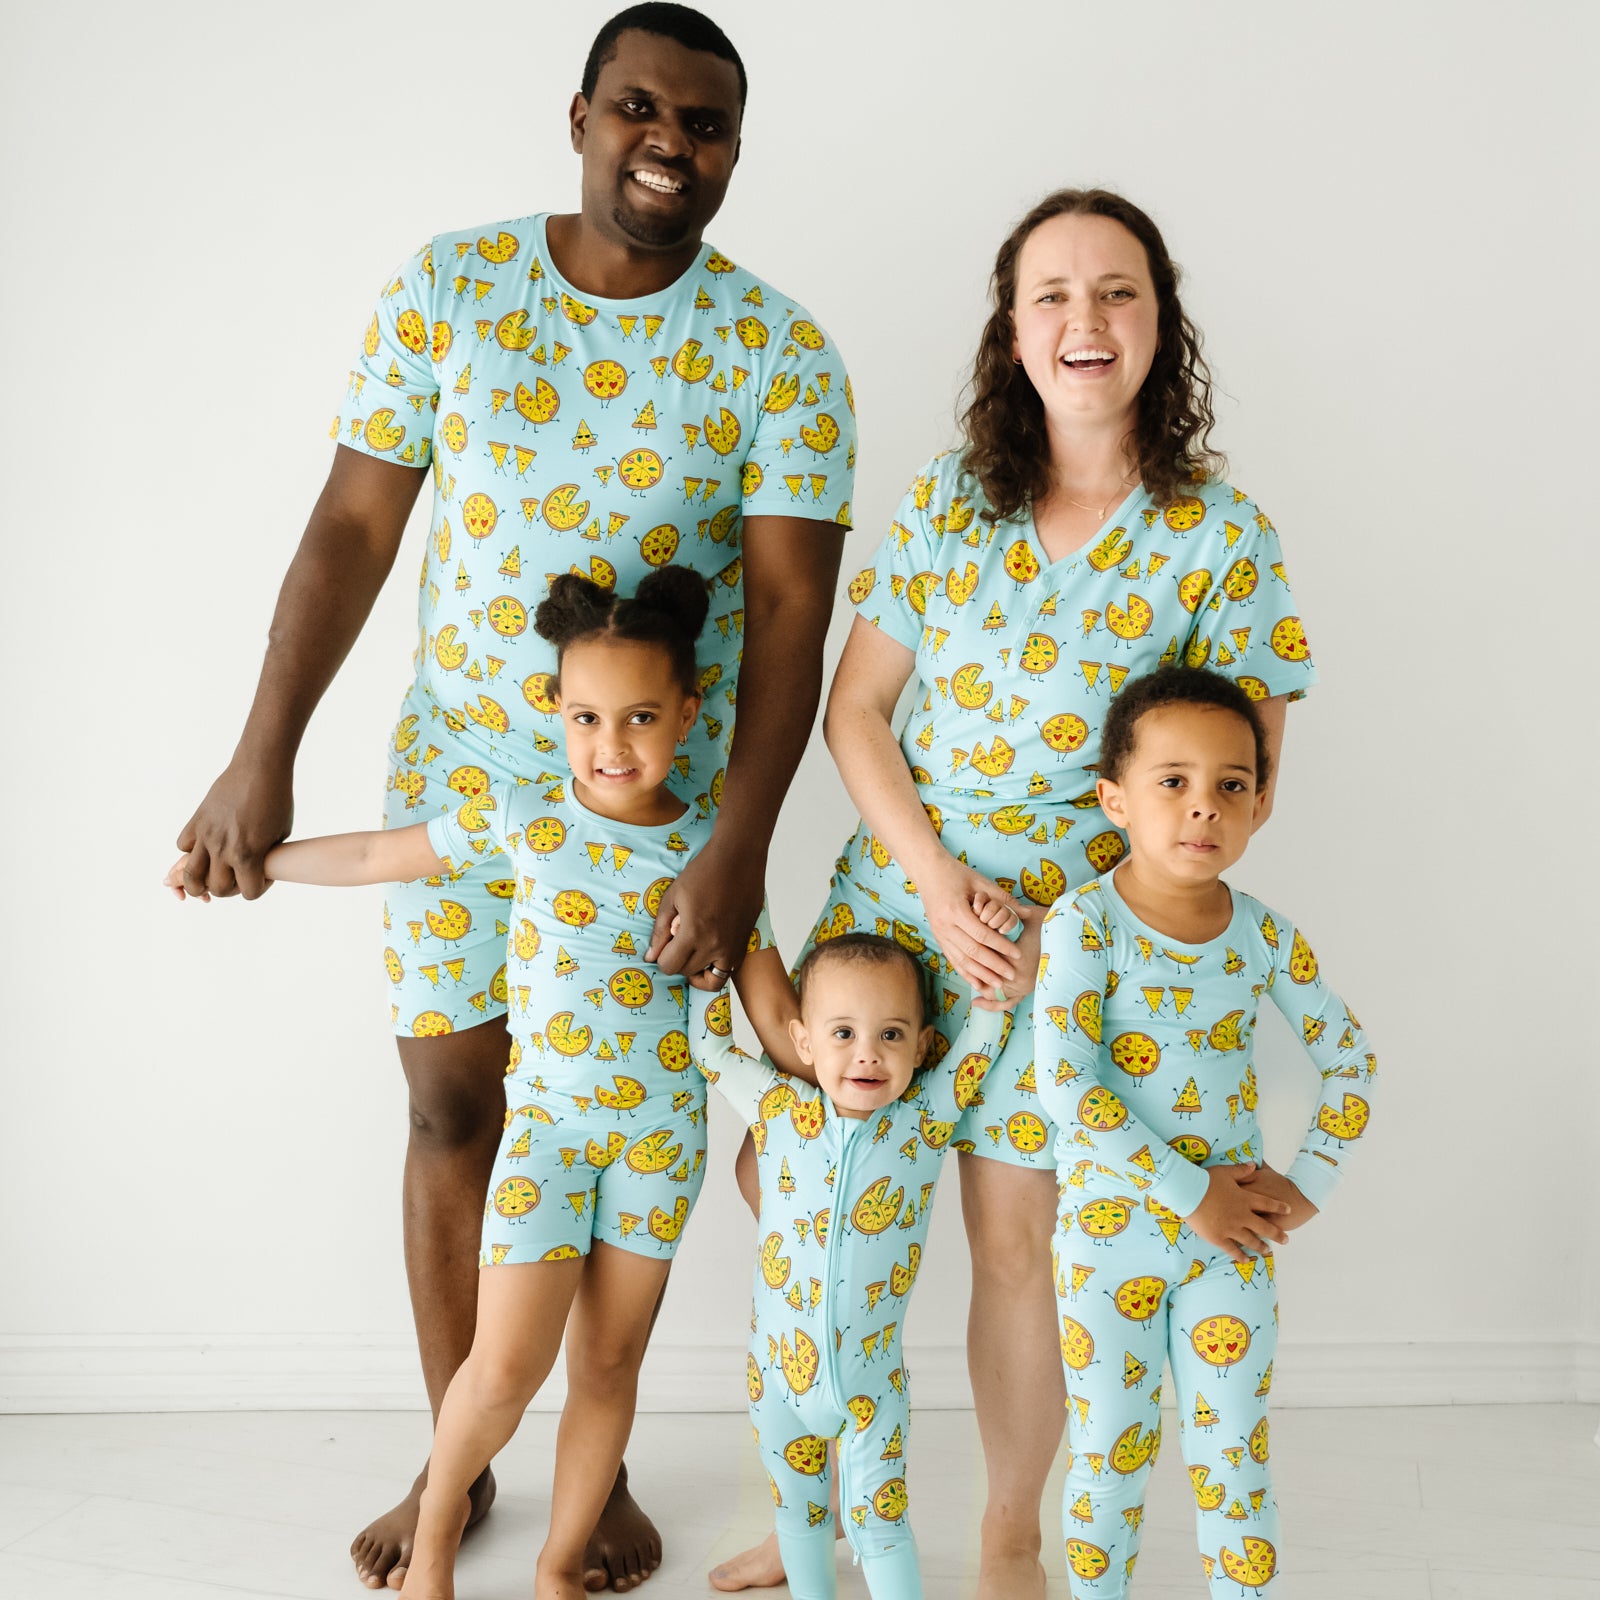 Family of five wearing matching pjs. Mom is wearing a women's Pizza Pal pajama top and matching women's pajama shorts. Dad is wearing men's Pizza Pals men's pj top and matching men's pj shorts. Kids are wearing matching Pizza Pals pjs in two piece and zippy styles